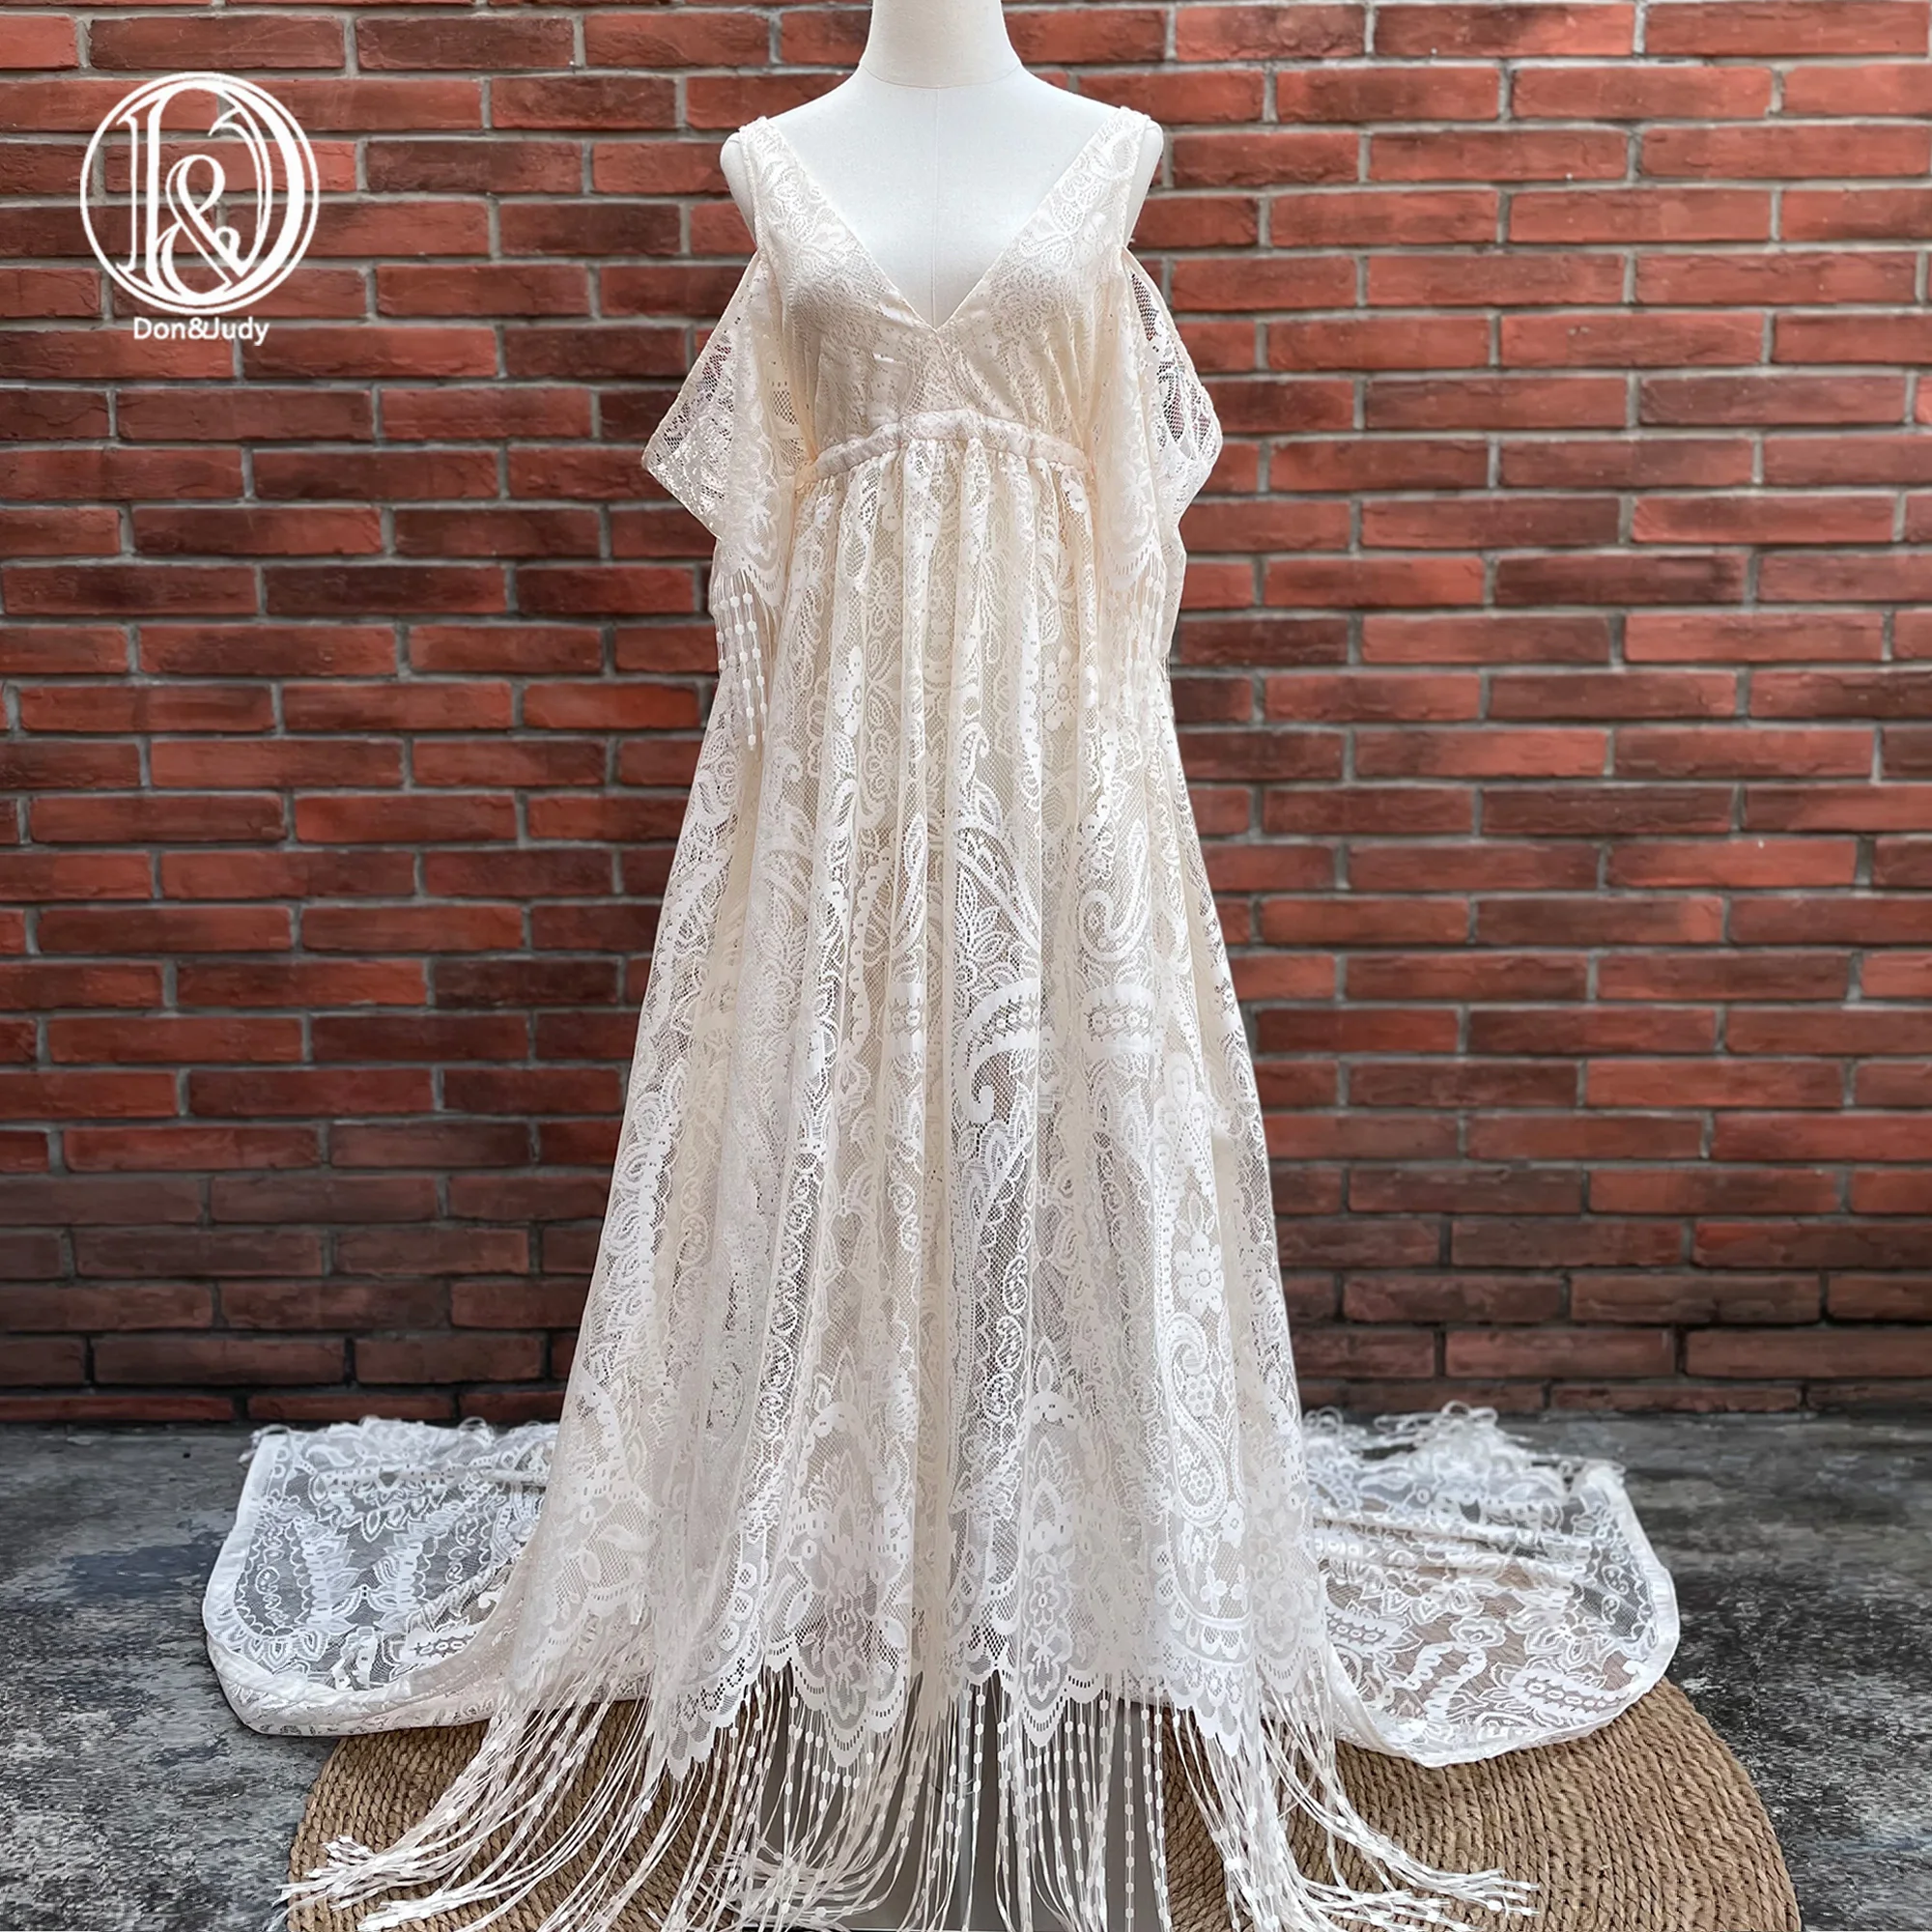 Enlarge Don&Judy Deep V Lace Super Long Tassels Maternity Dress Photo Shoot Pregnant Woman Photography Drop Shoulder Gown Party Clothes